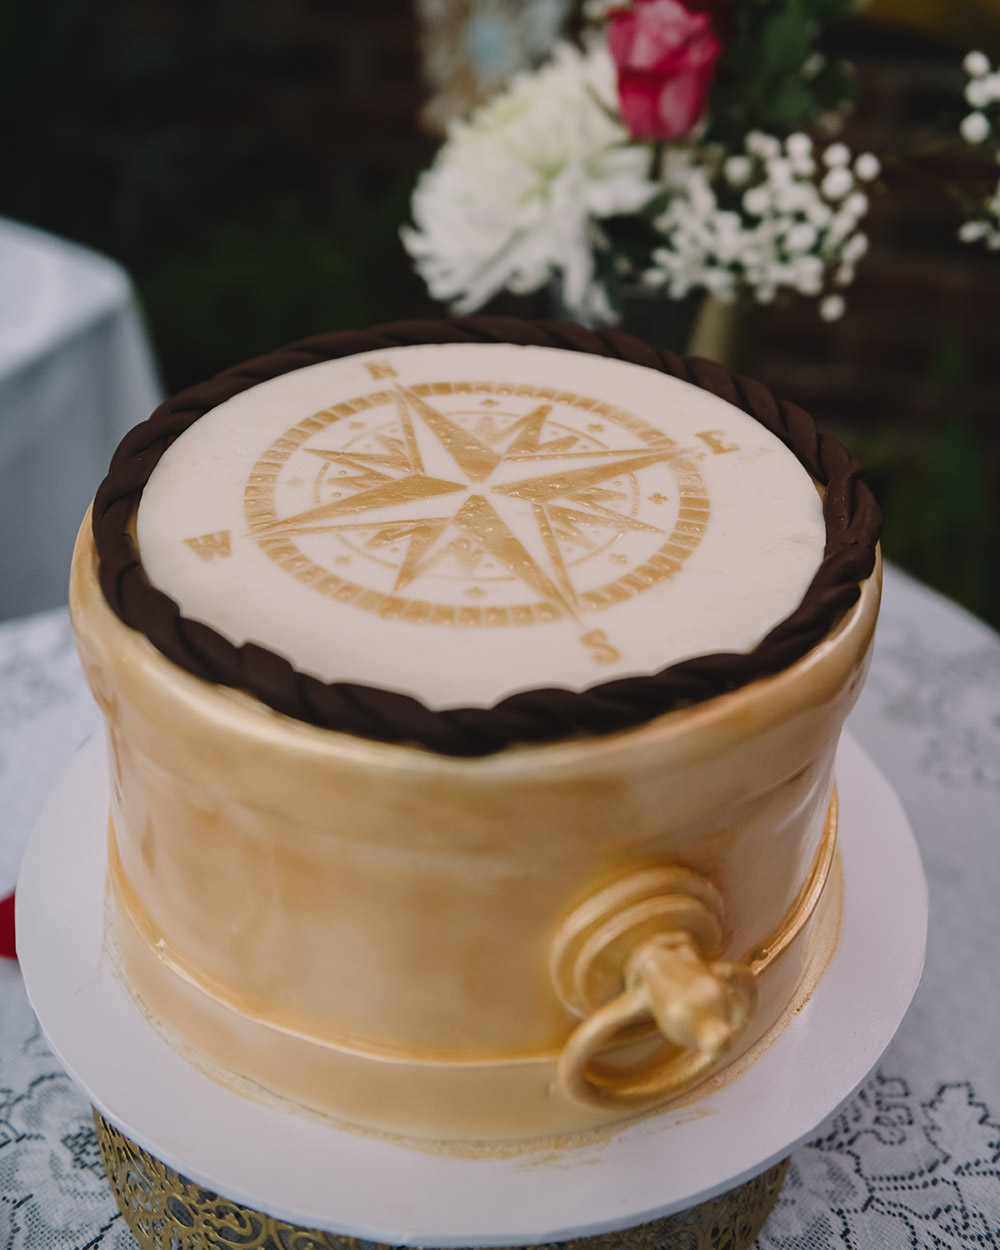 The groom's cake featured a Compass Rose design. Photo: Rare Sighting Photography